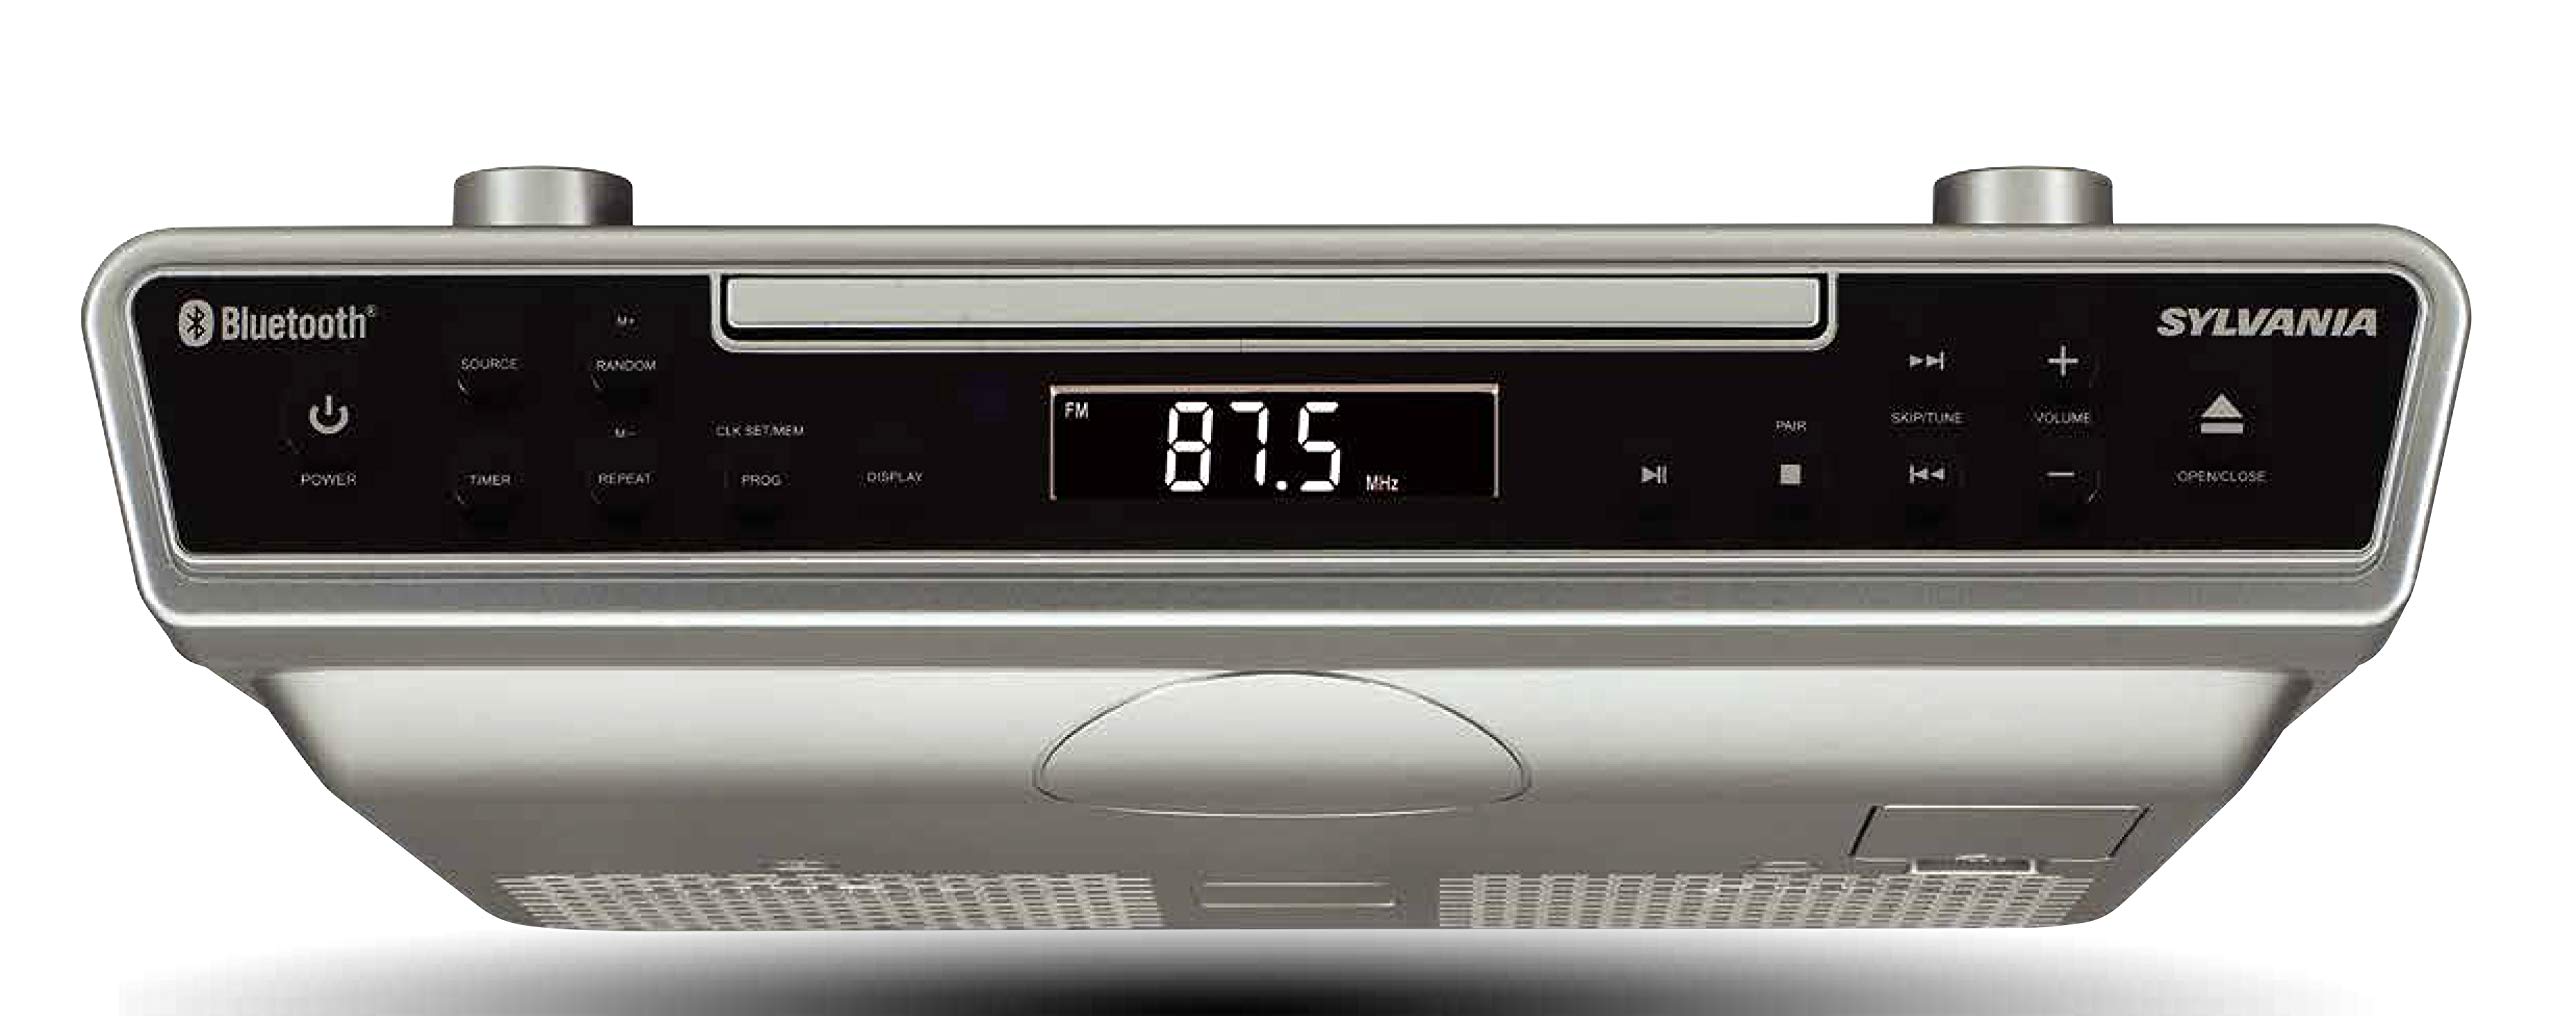 SYLVANIA SKCR2713 Under Counter CD Player with Clock Radio and Bluetooth, Silver